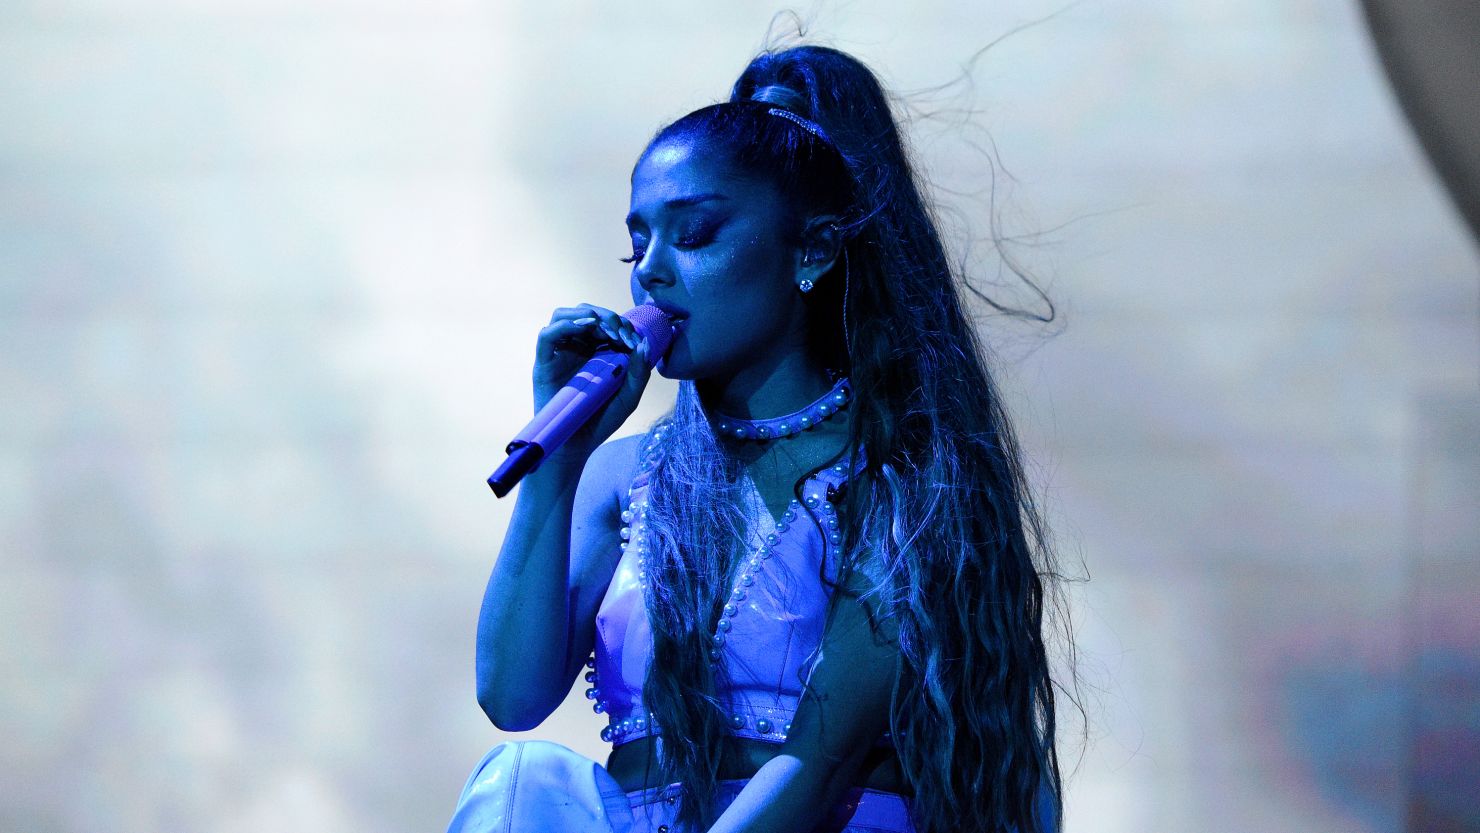 Ariana Grande performing at Chicago's Lollapalooza music festival in 2019.